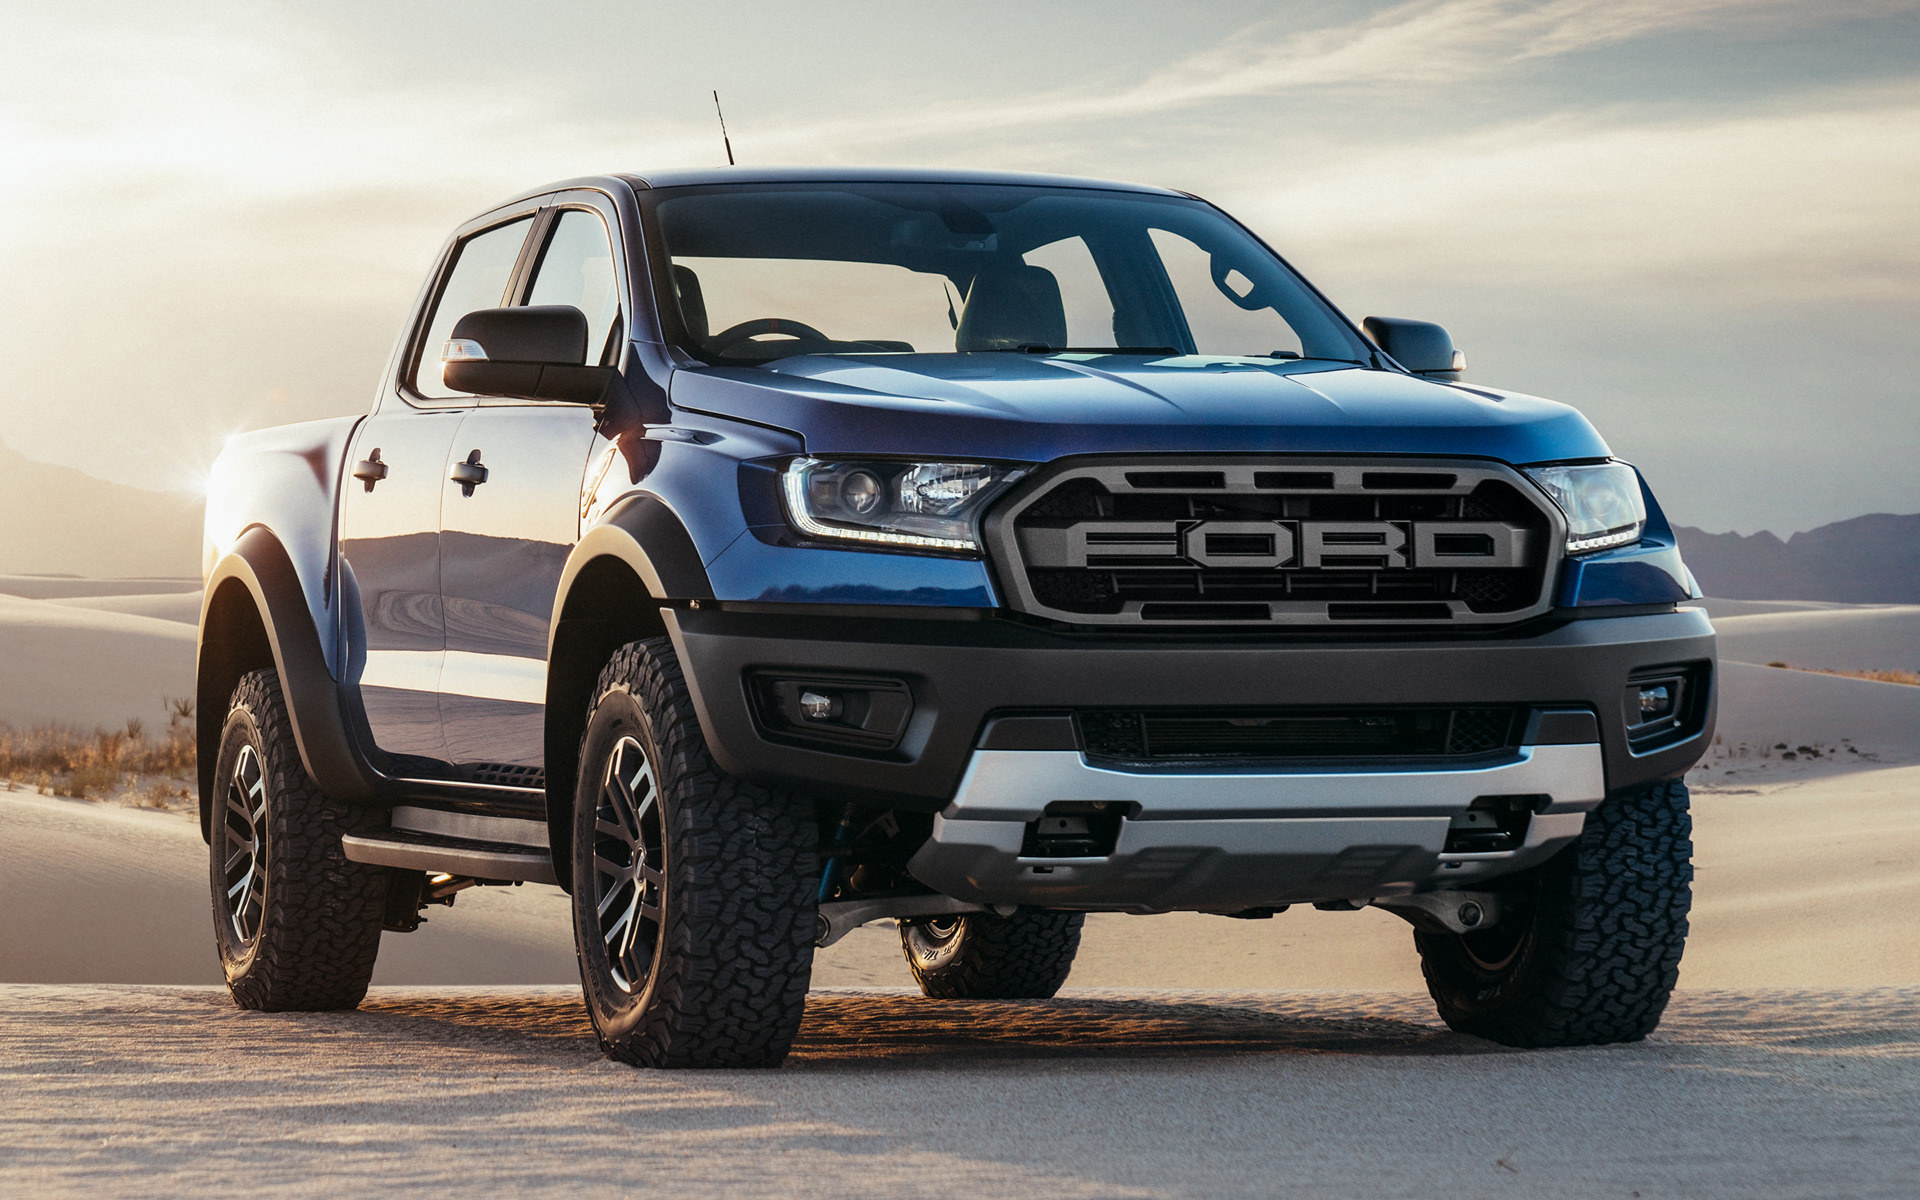 Ford Ranger Raptor Double Cab Th Wallpaper And HD Image